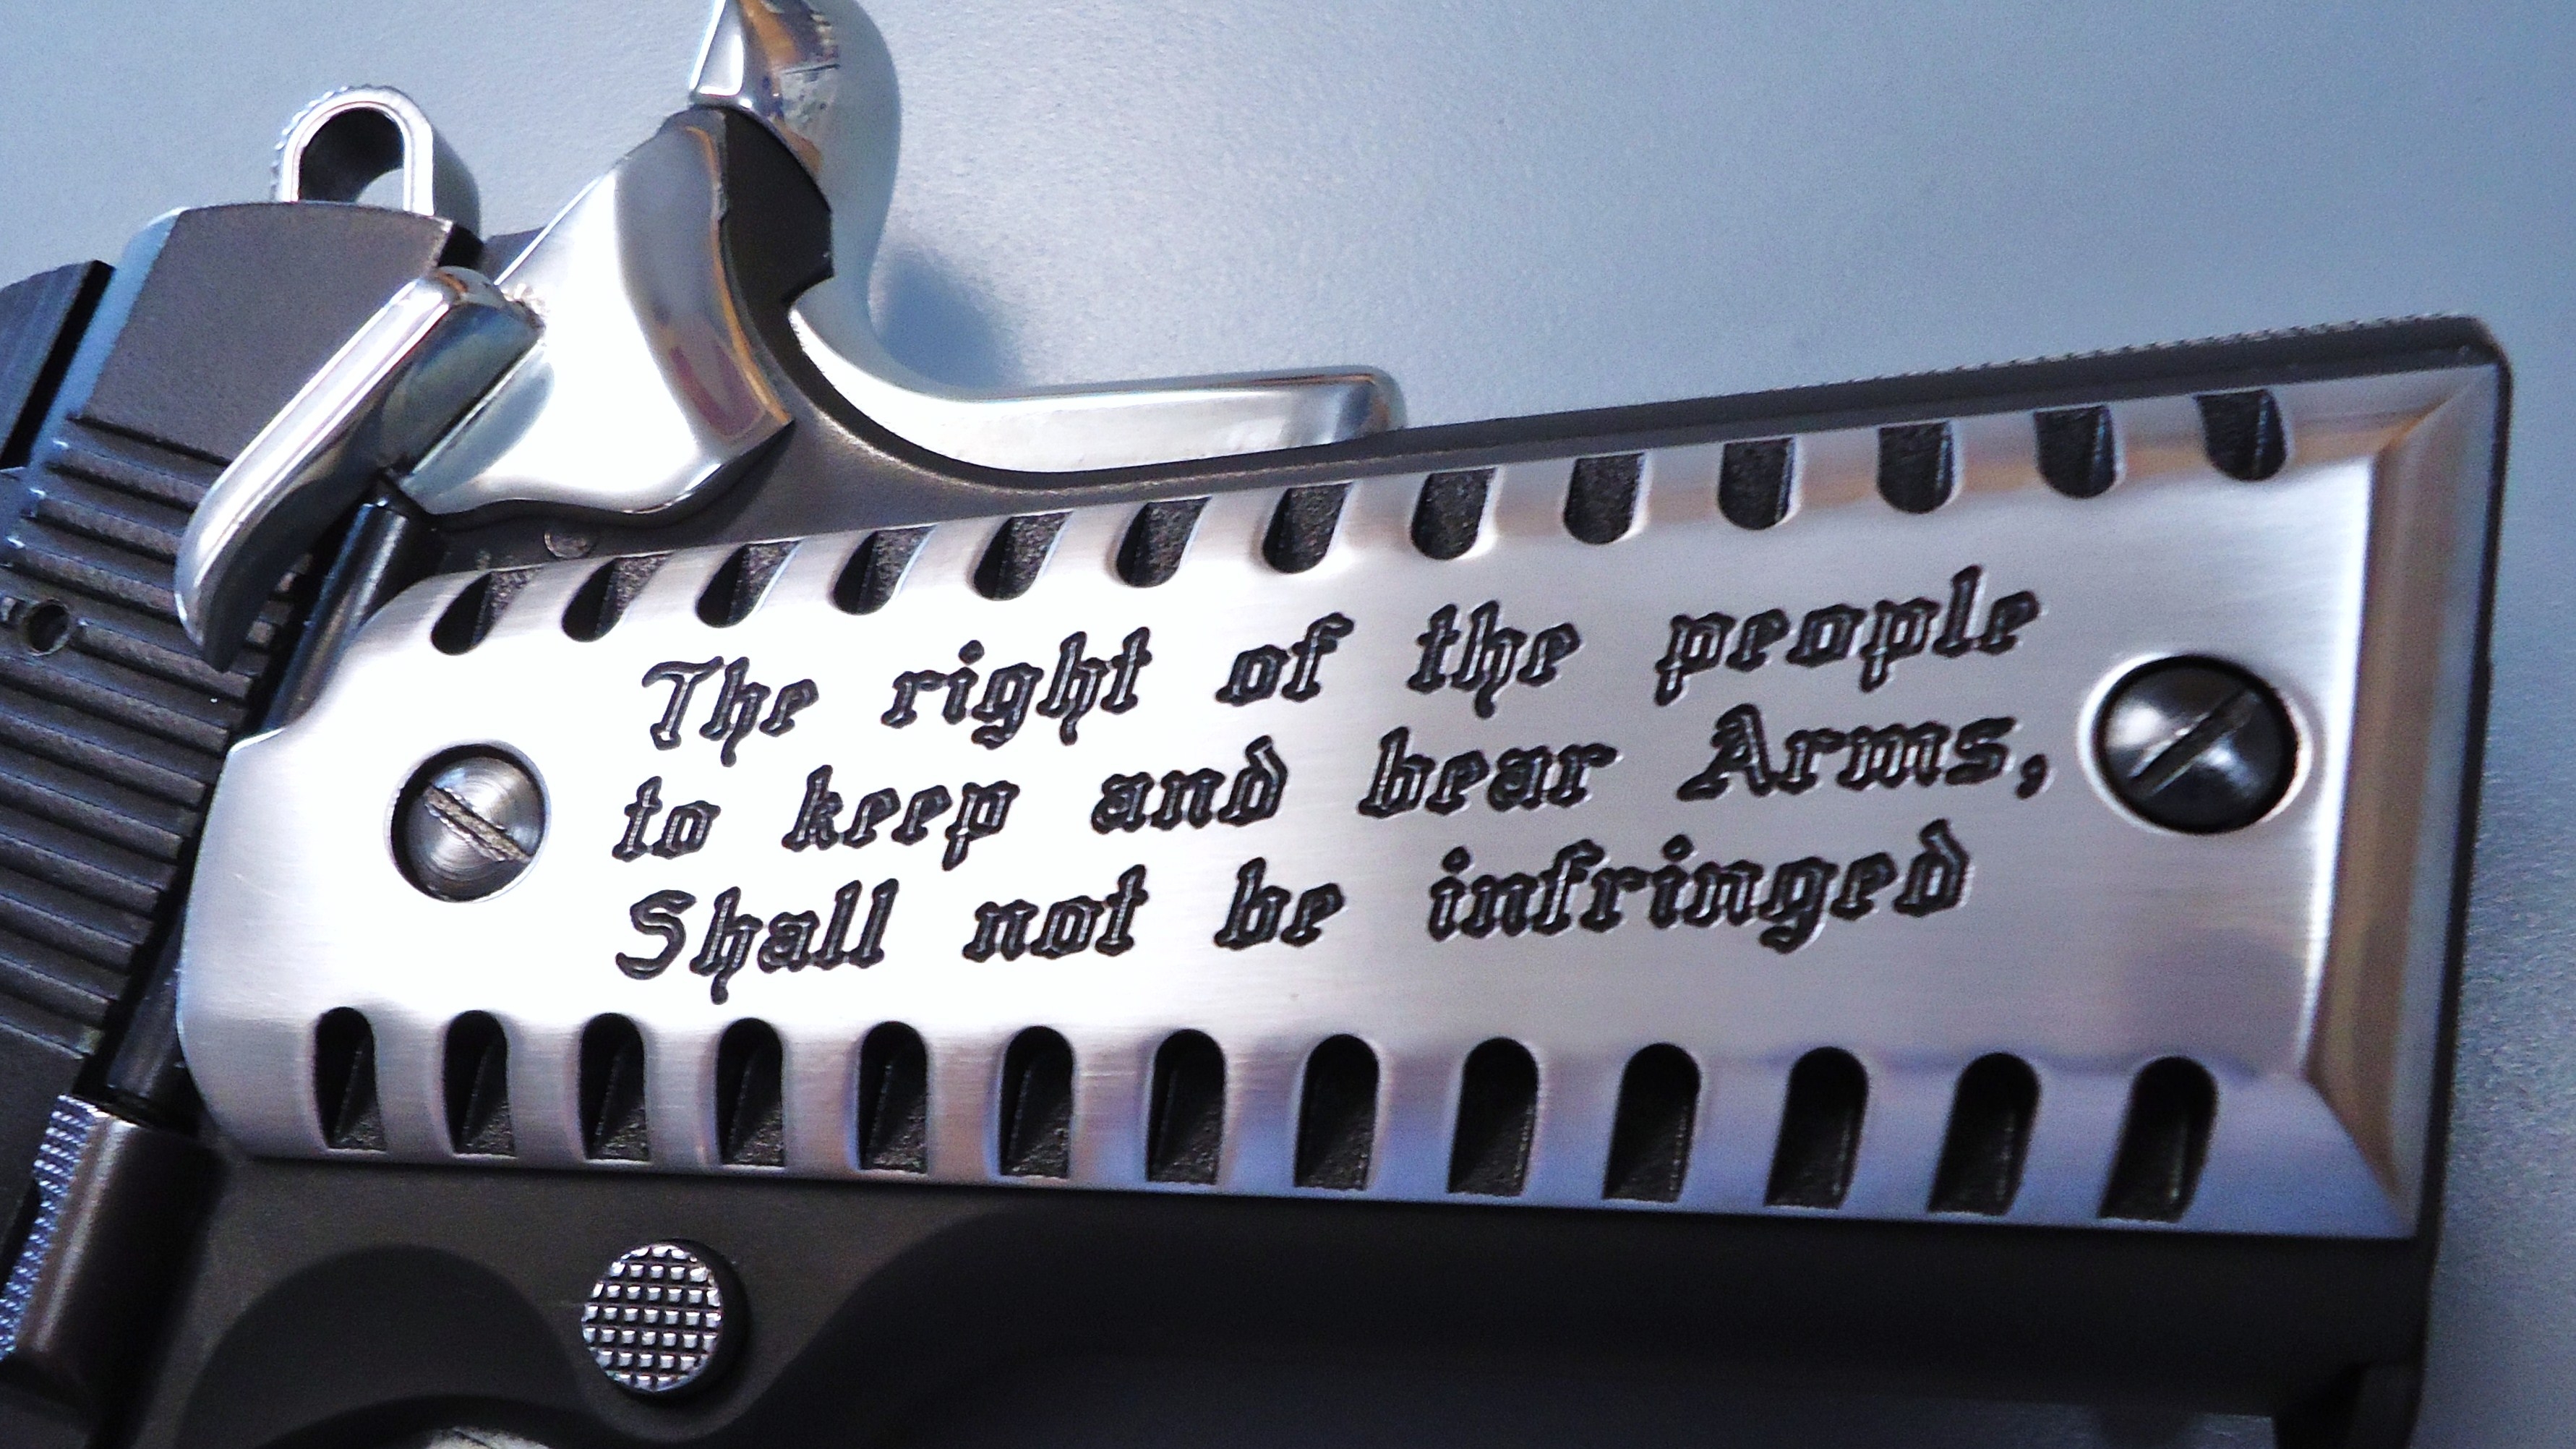 2nd amendment - The right of the people to keep and bear Arms, Shall not be infringed